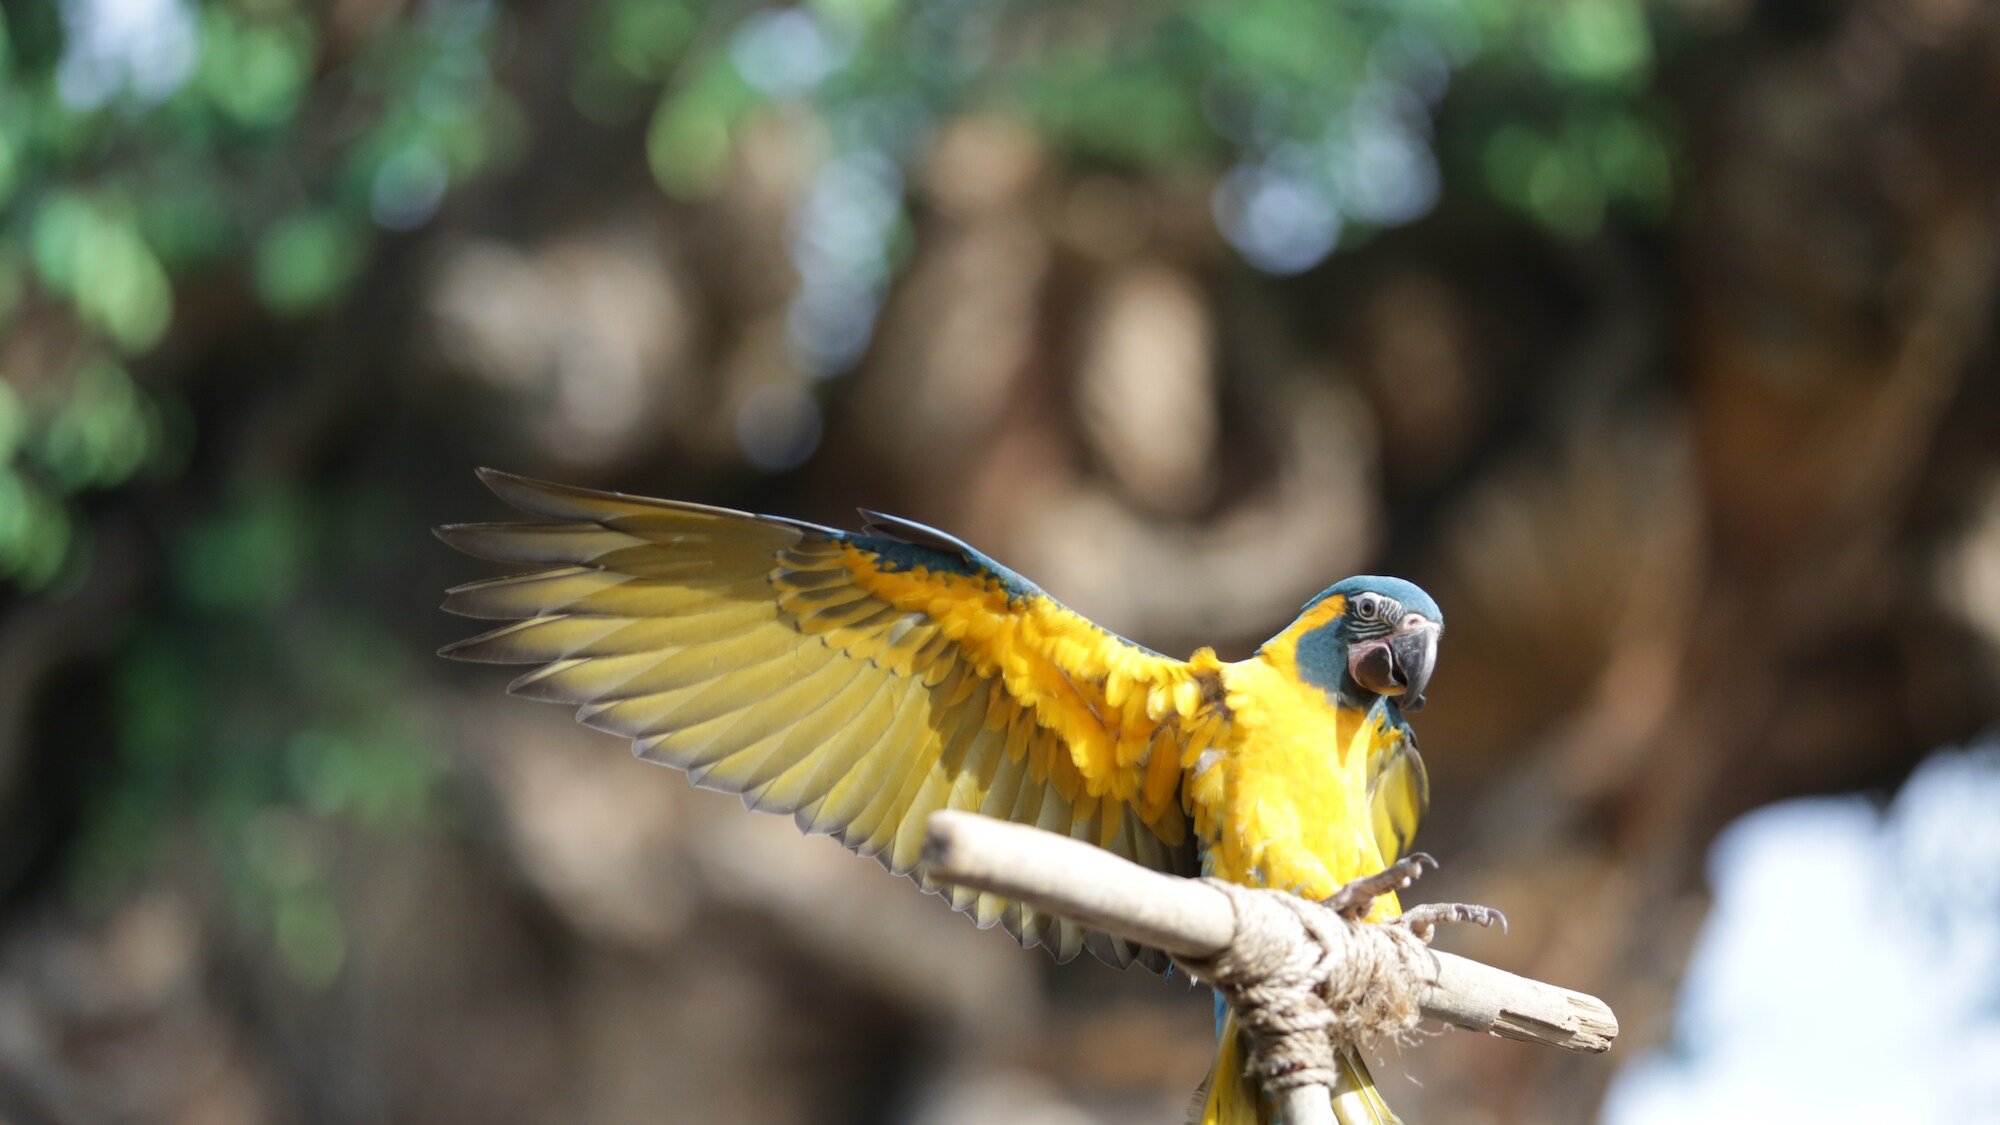 Blue-throated macaw Mia lands on perch at Winged Encounters – The Kingdom Takes Flight. (Disney)